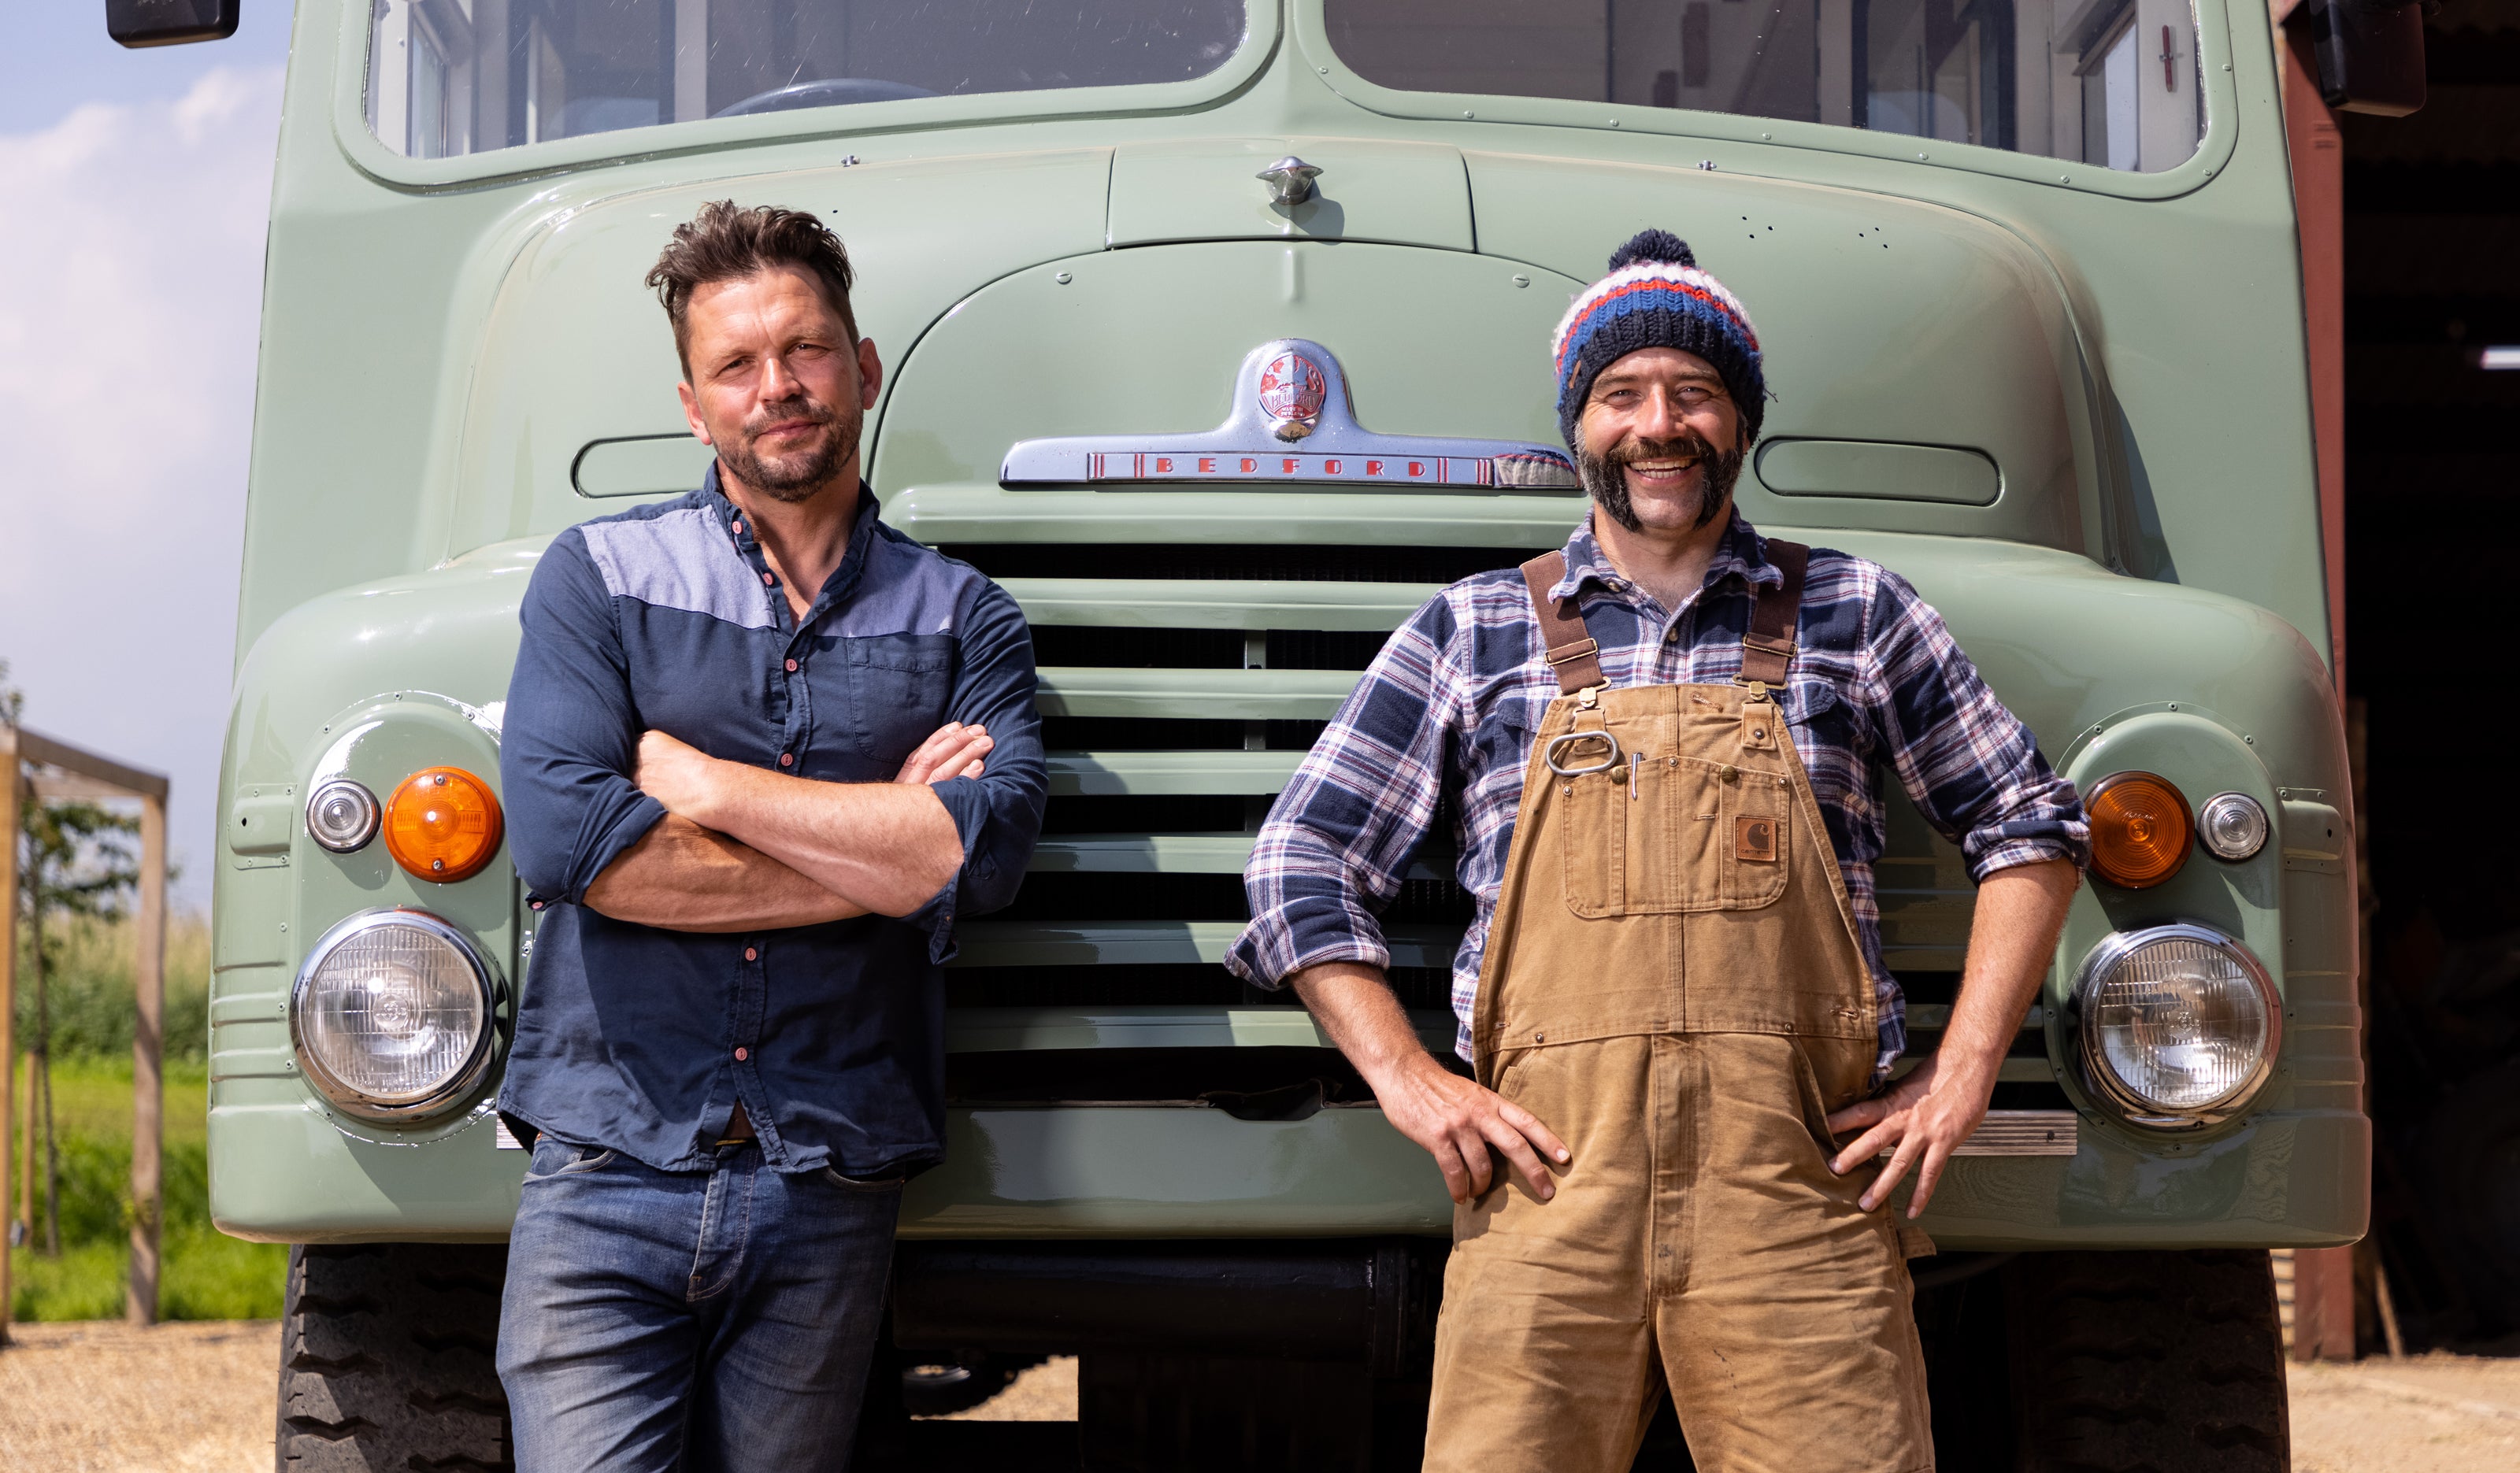 Jimmy Doherty and Jimmy de Ville with their Green Goddess camper van (Quest/Discovery+/PA)